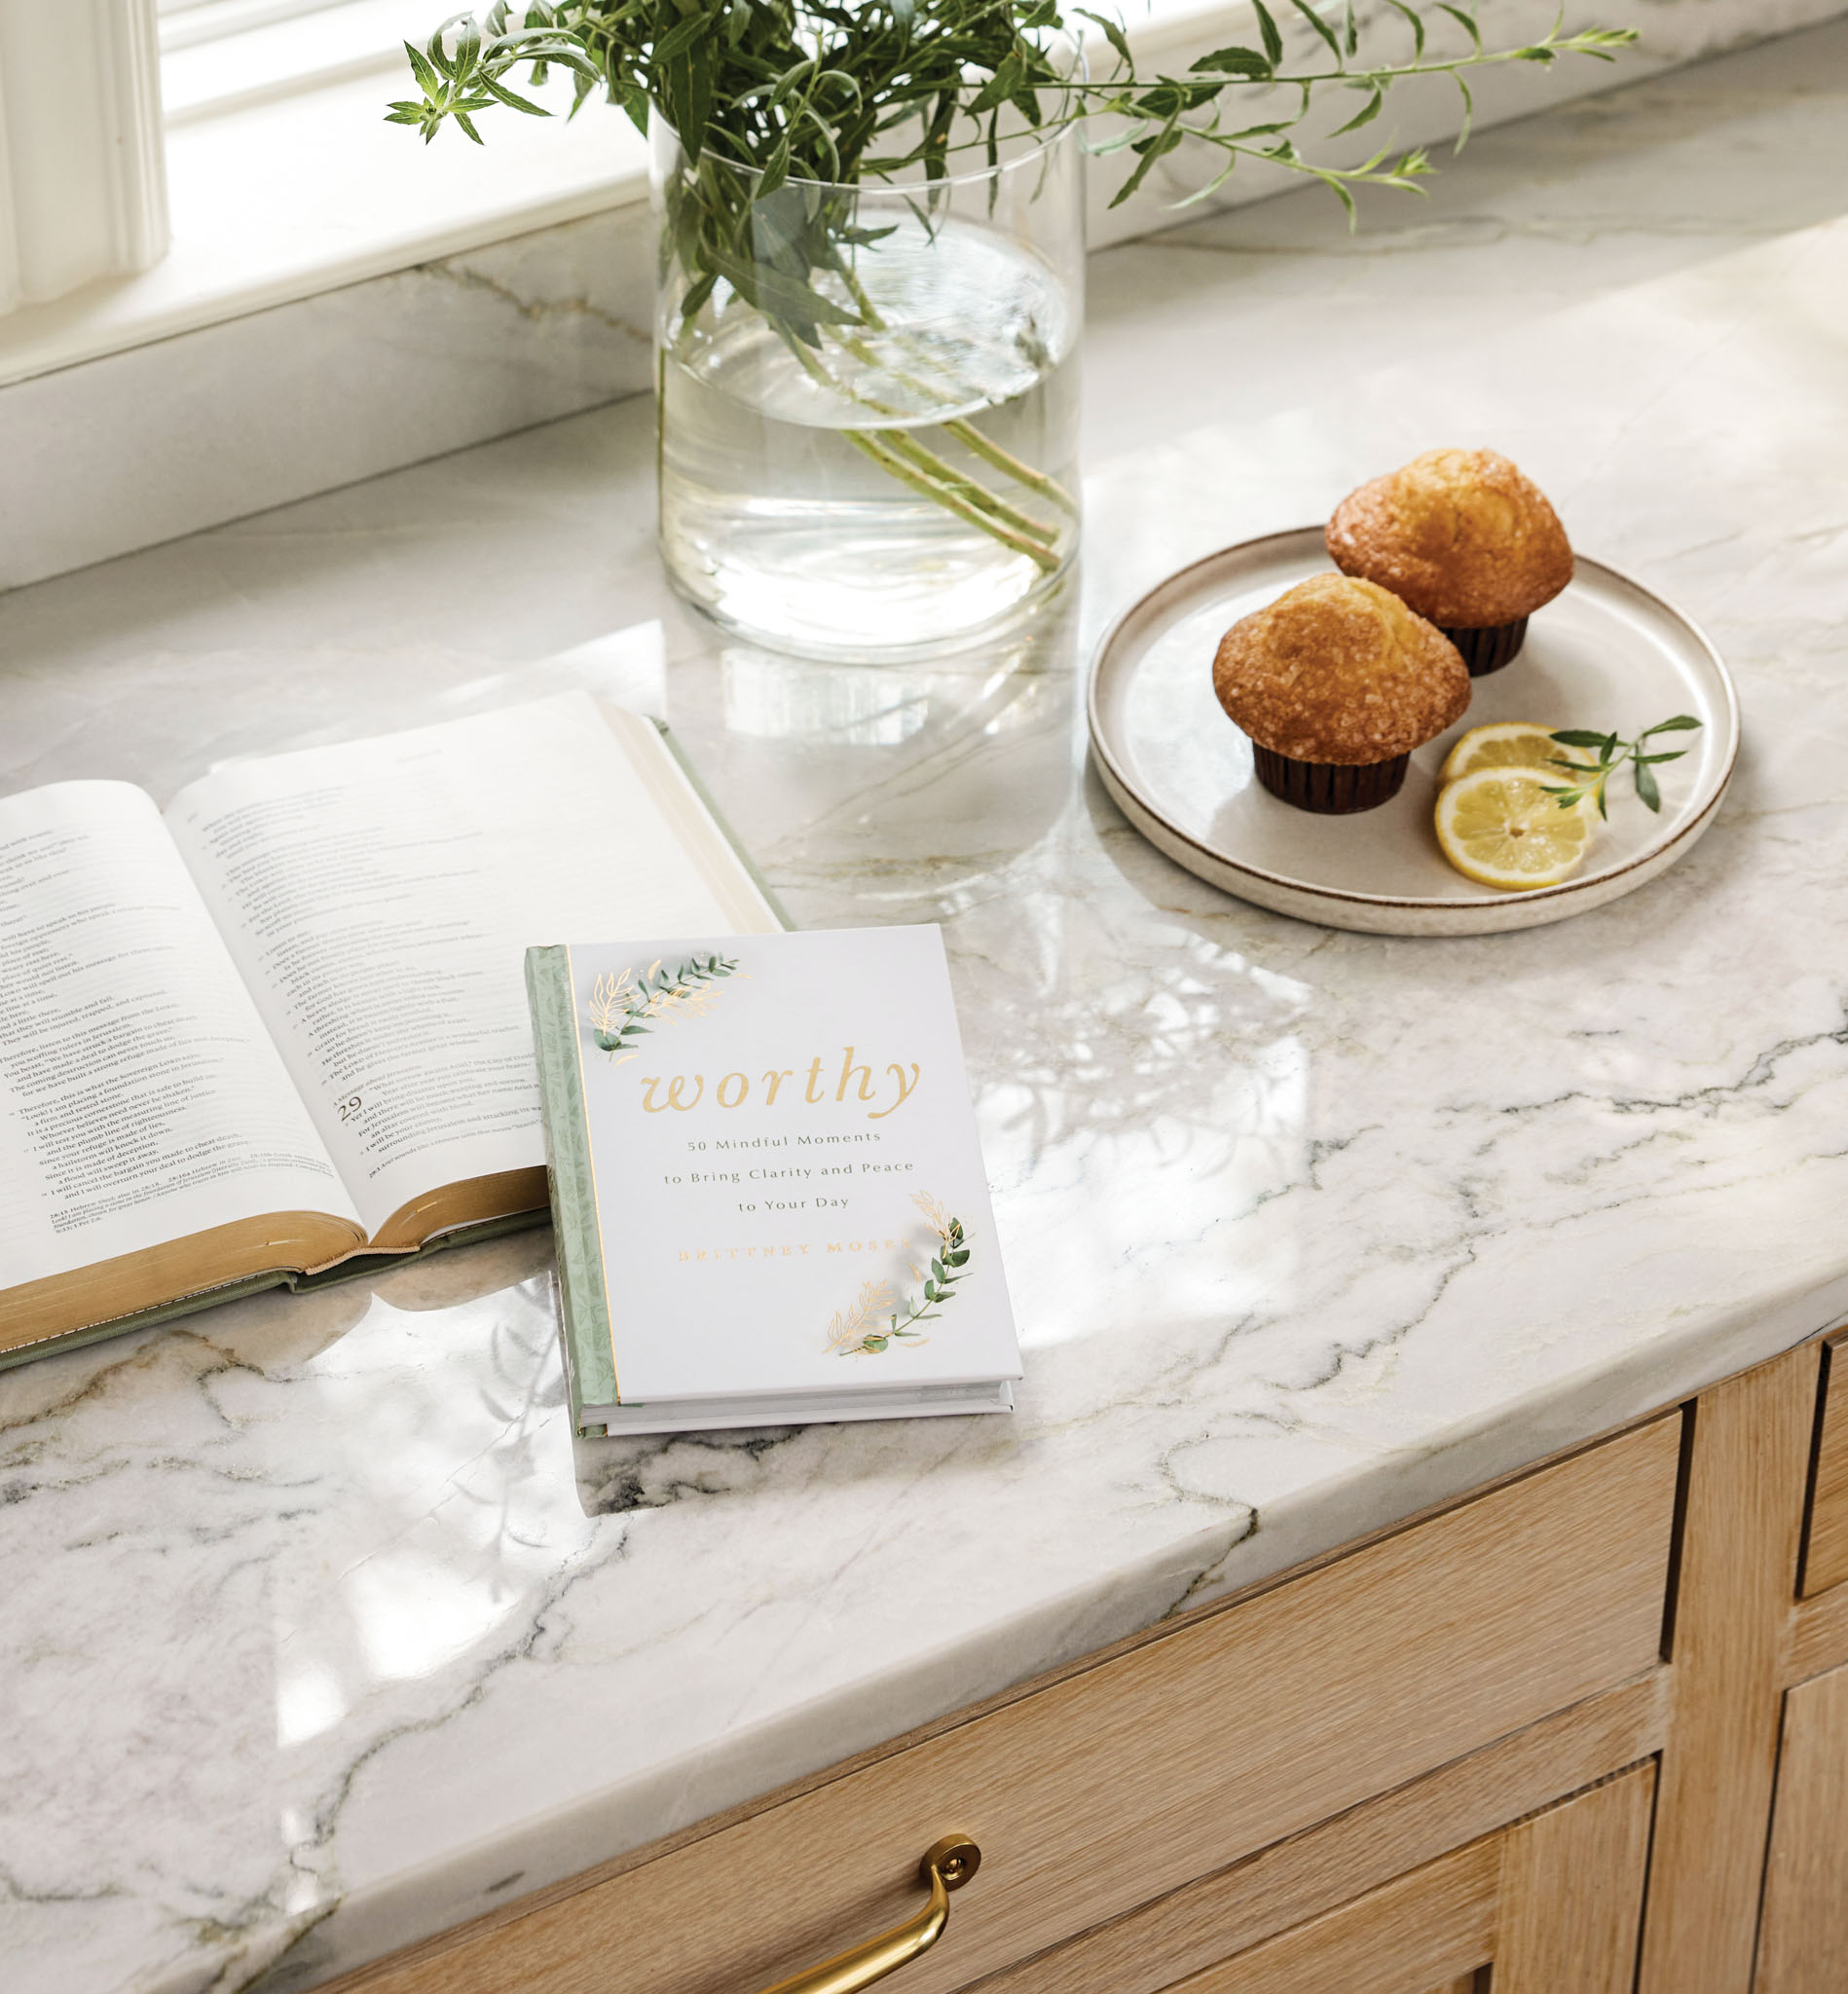 devotion book with muffins to eat